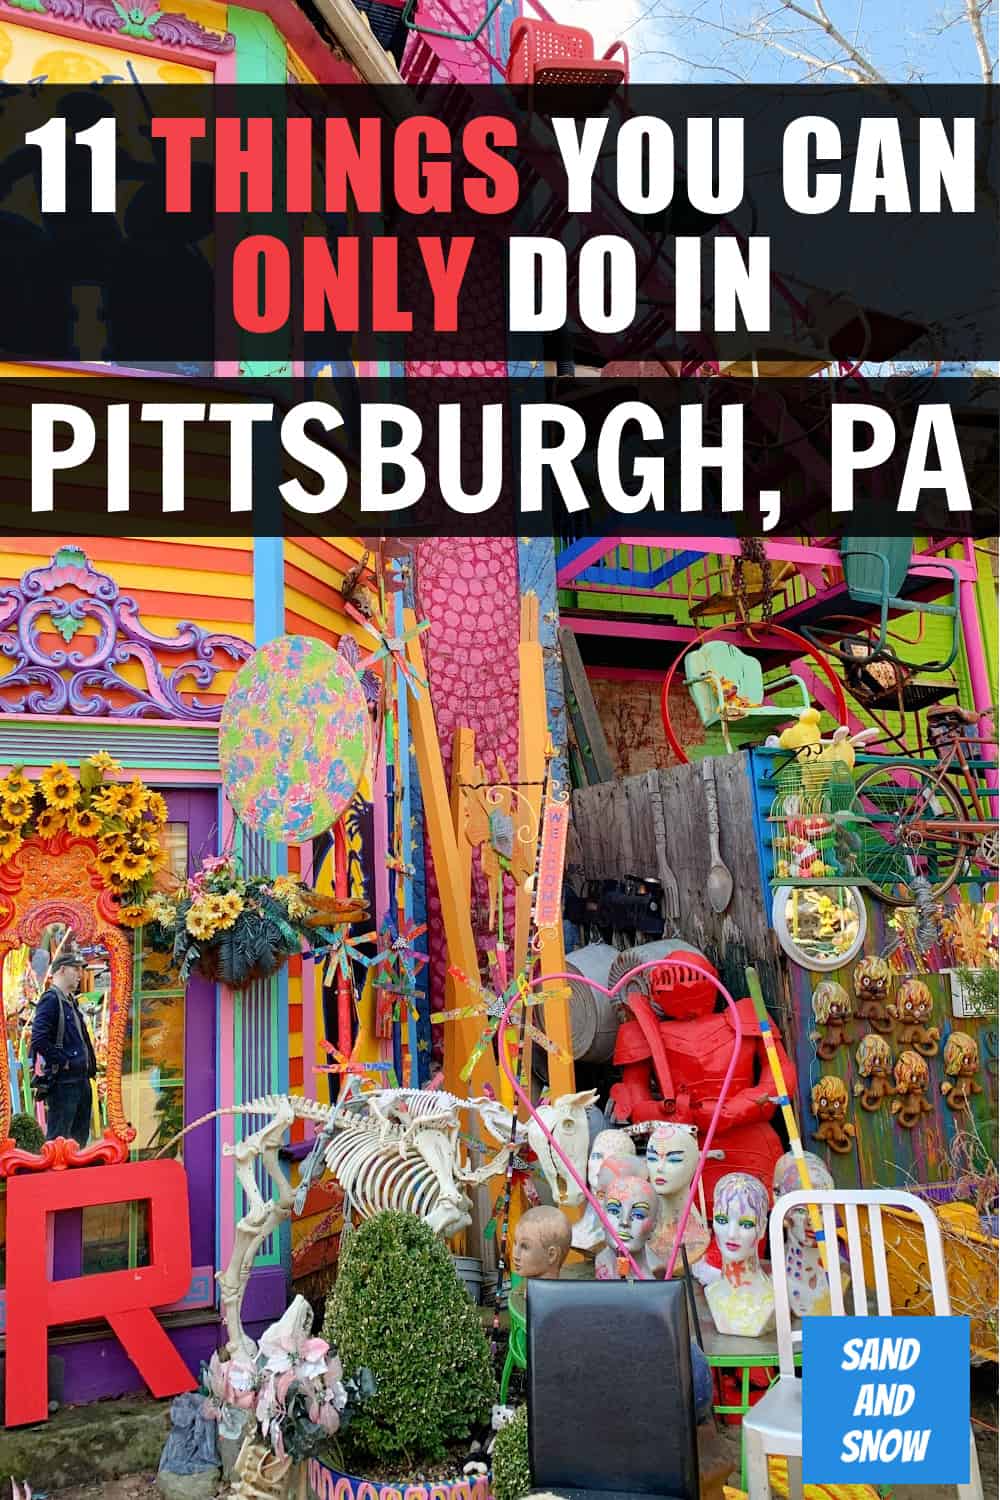 11 things you can only do in Pittsburgh